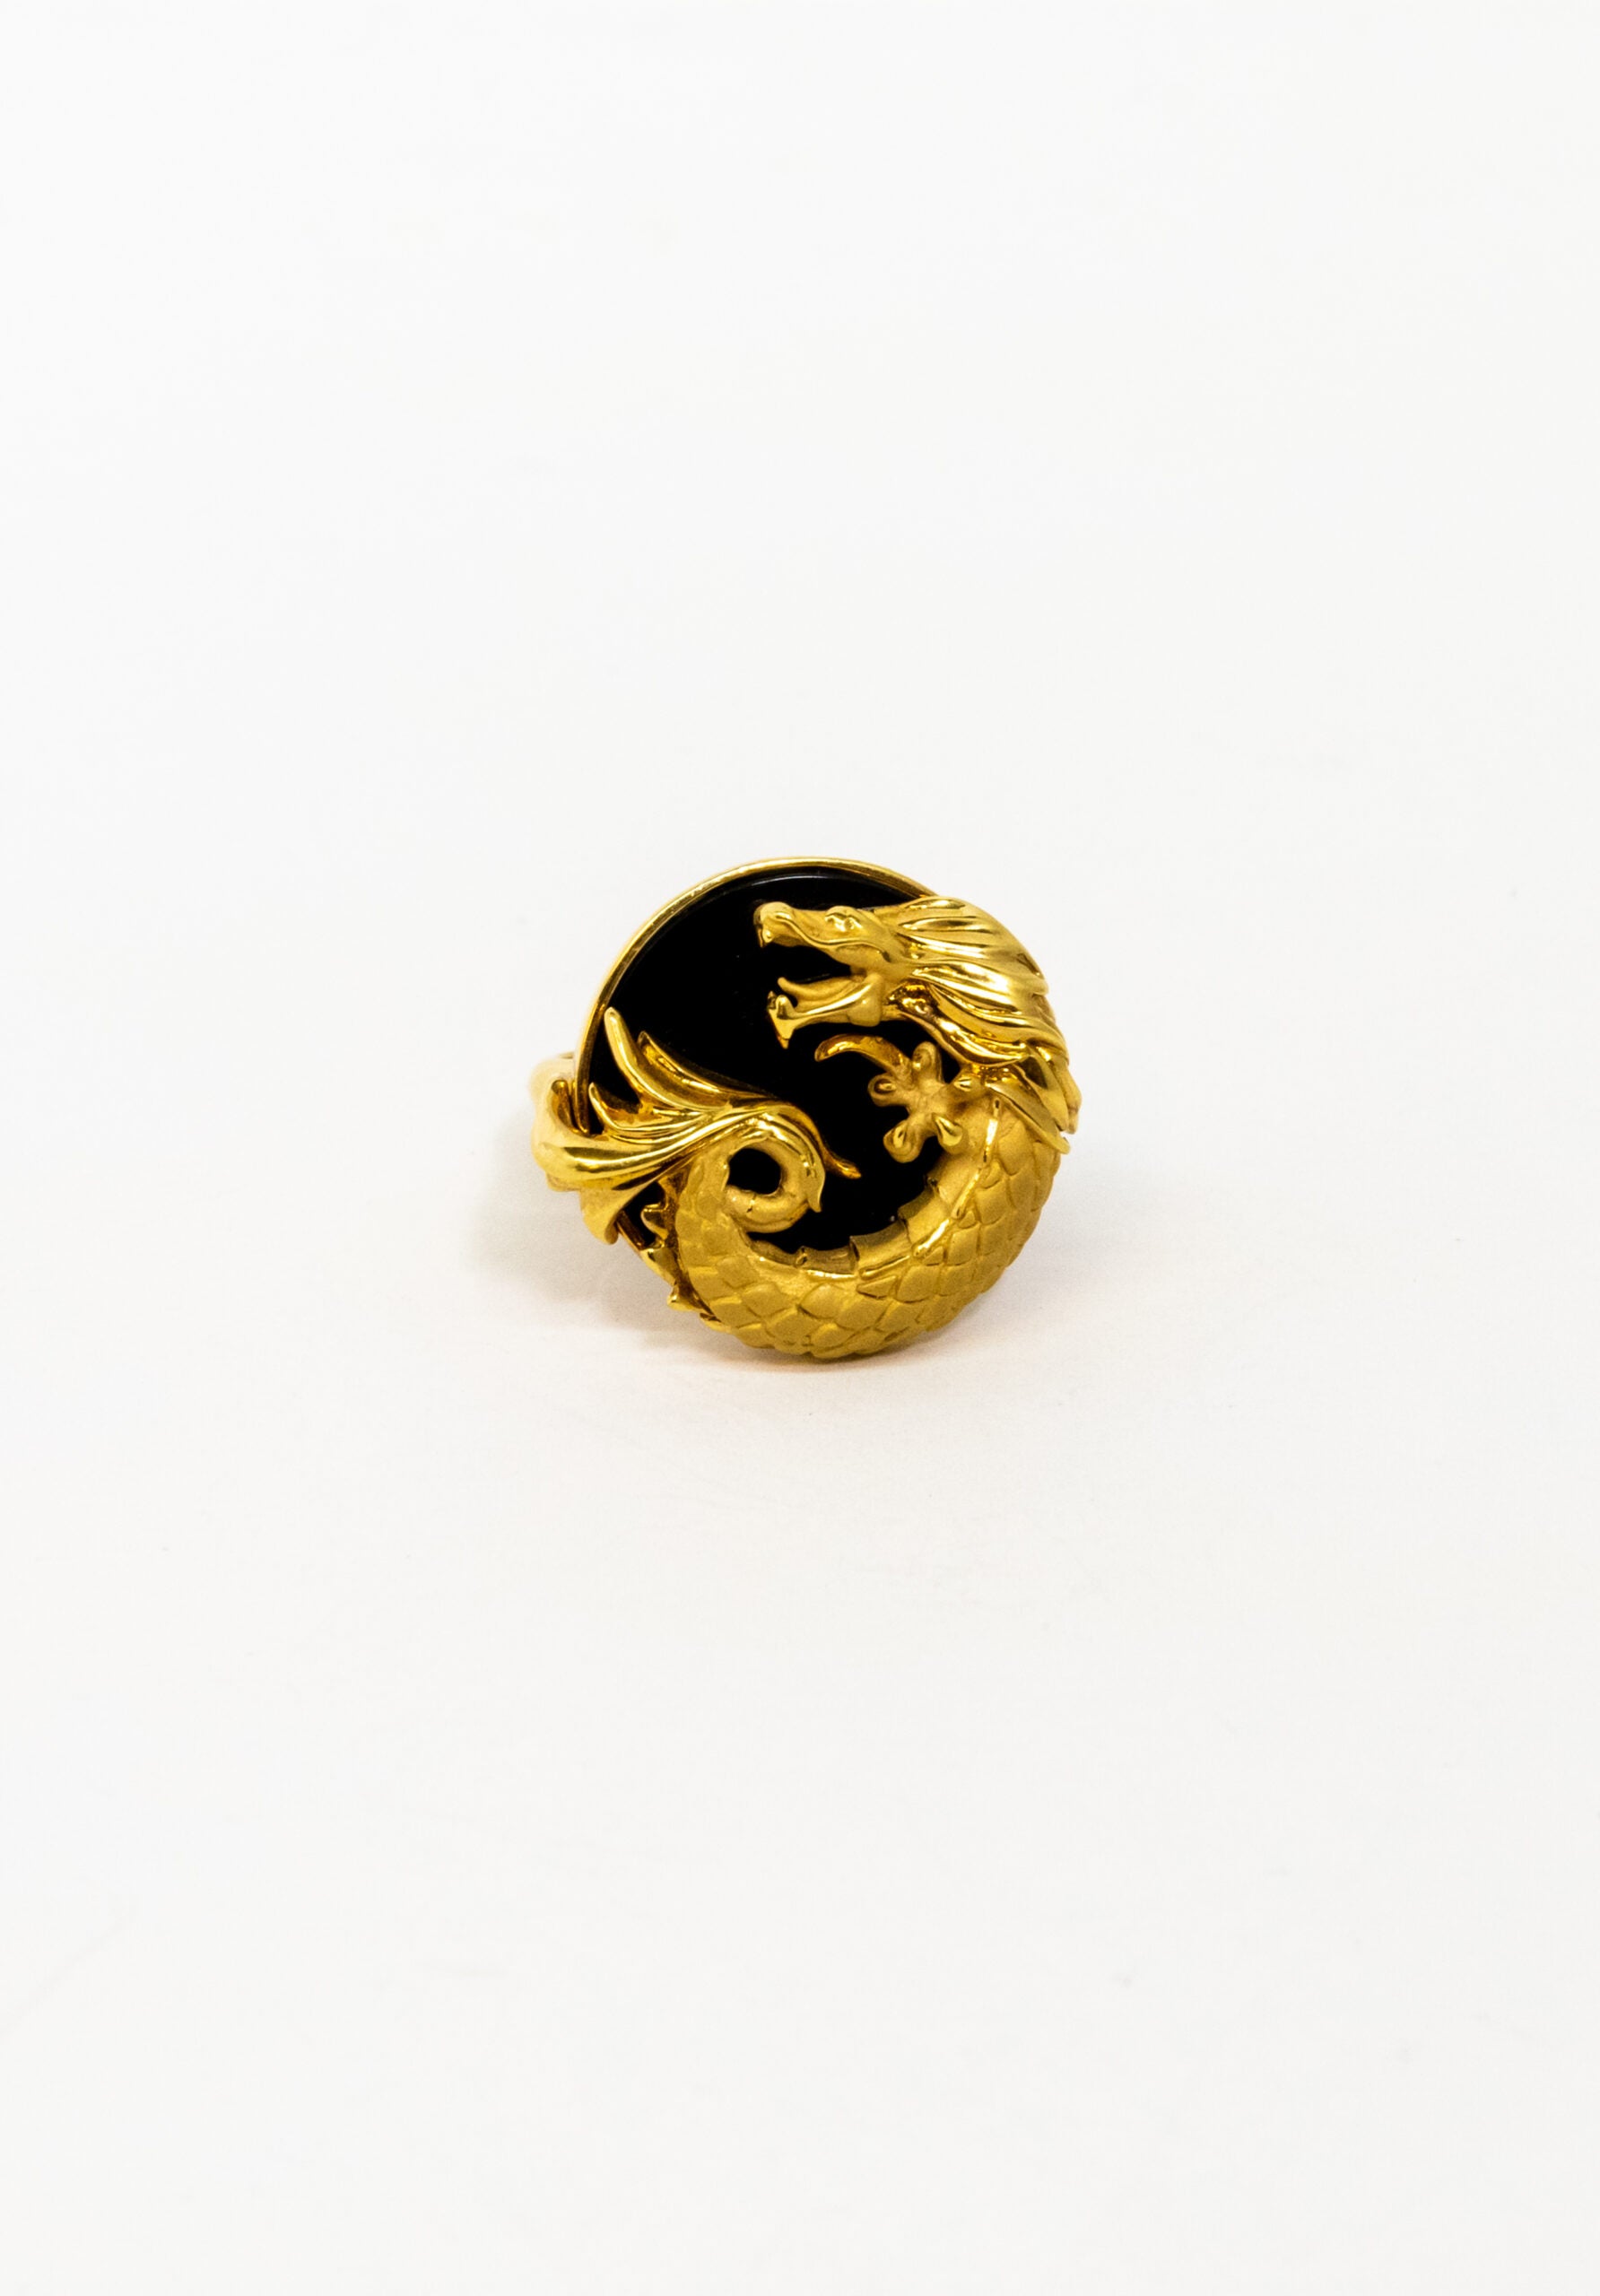 Carrera Y Carrera Circles of Fire 18K Yellow Gold and Onyx Ring